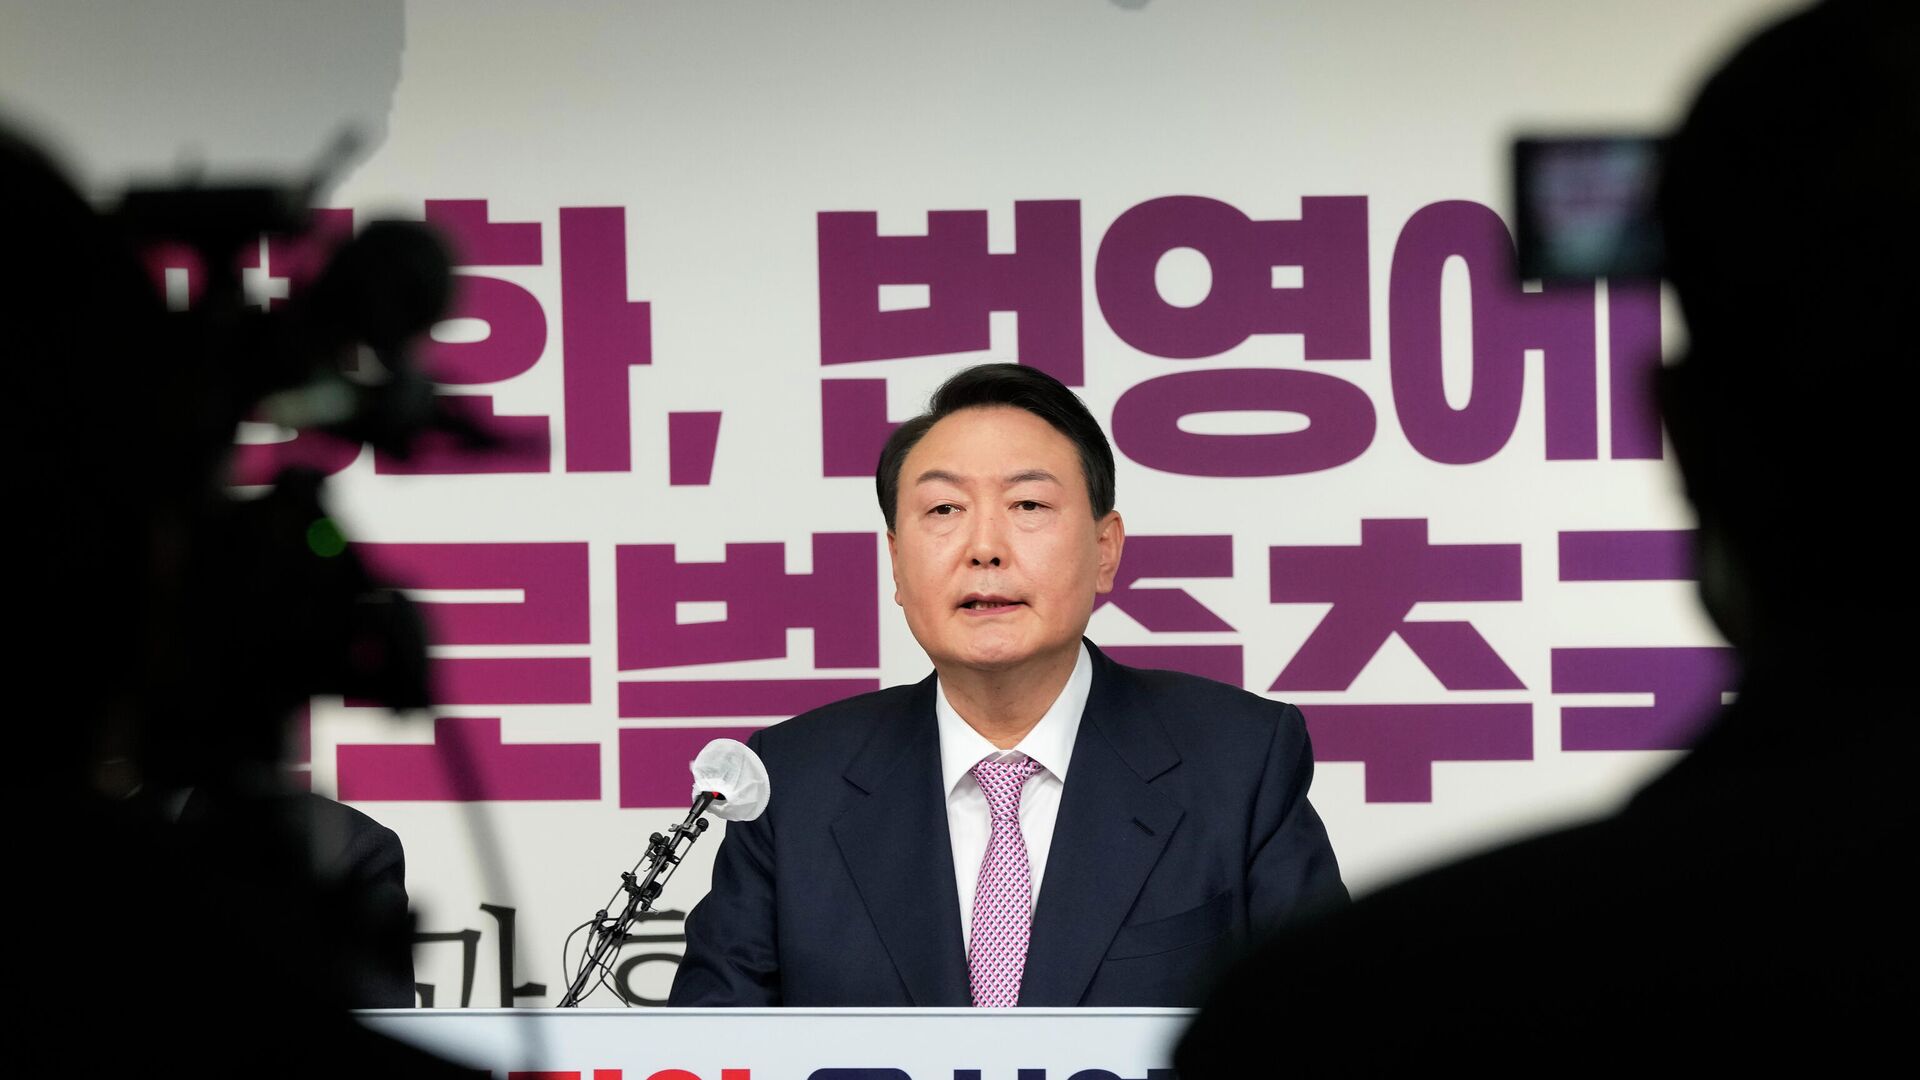 Yoon Suk Yeol, the presidential candidate of the main opposition People Power Party, speaks during a press conference at the party's headquarters in Seoul, South Korea Monday, Jan. 24, 2022. - Sputnik International, 1920, 10.05.2022